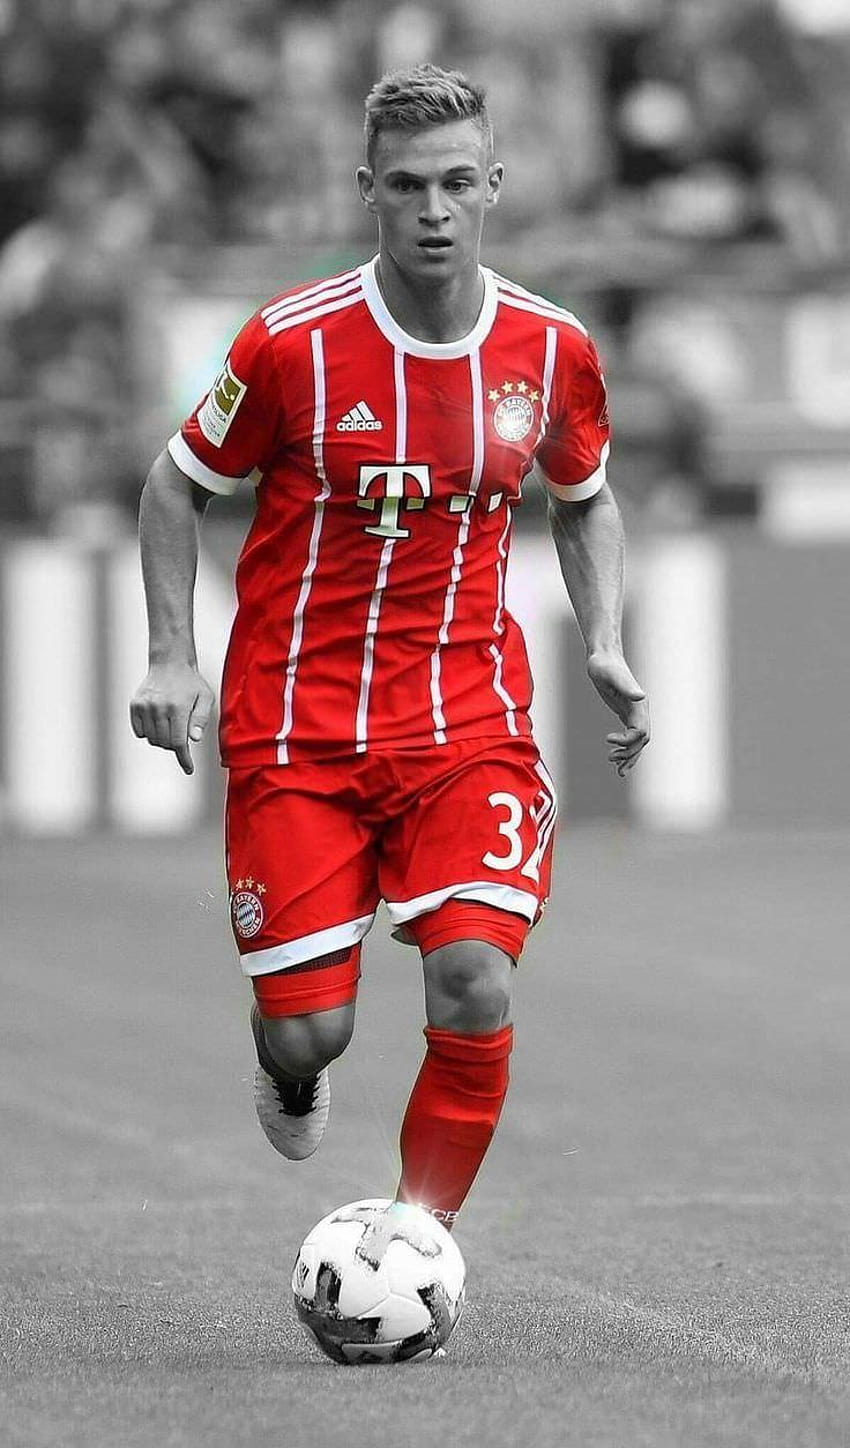 Joshua Kimmich for Android, joshua kimmich iphone 2020 HD phone wallpaper